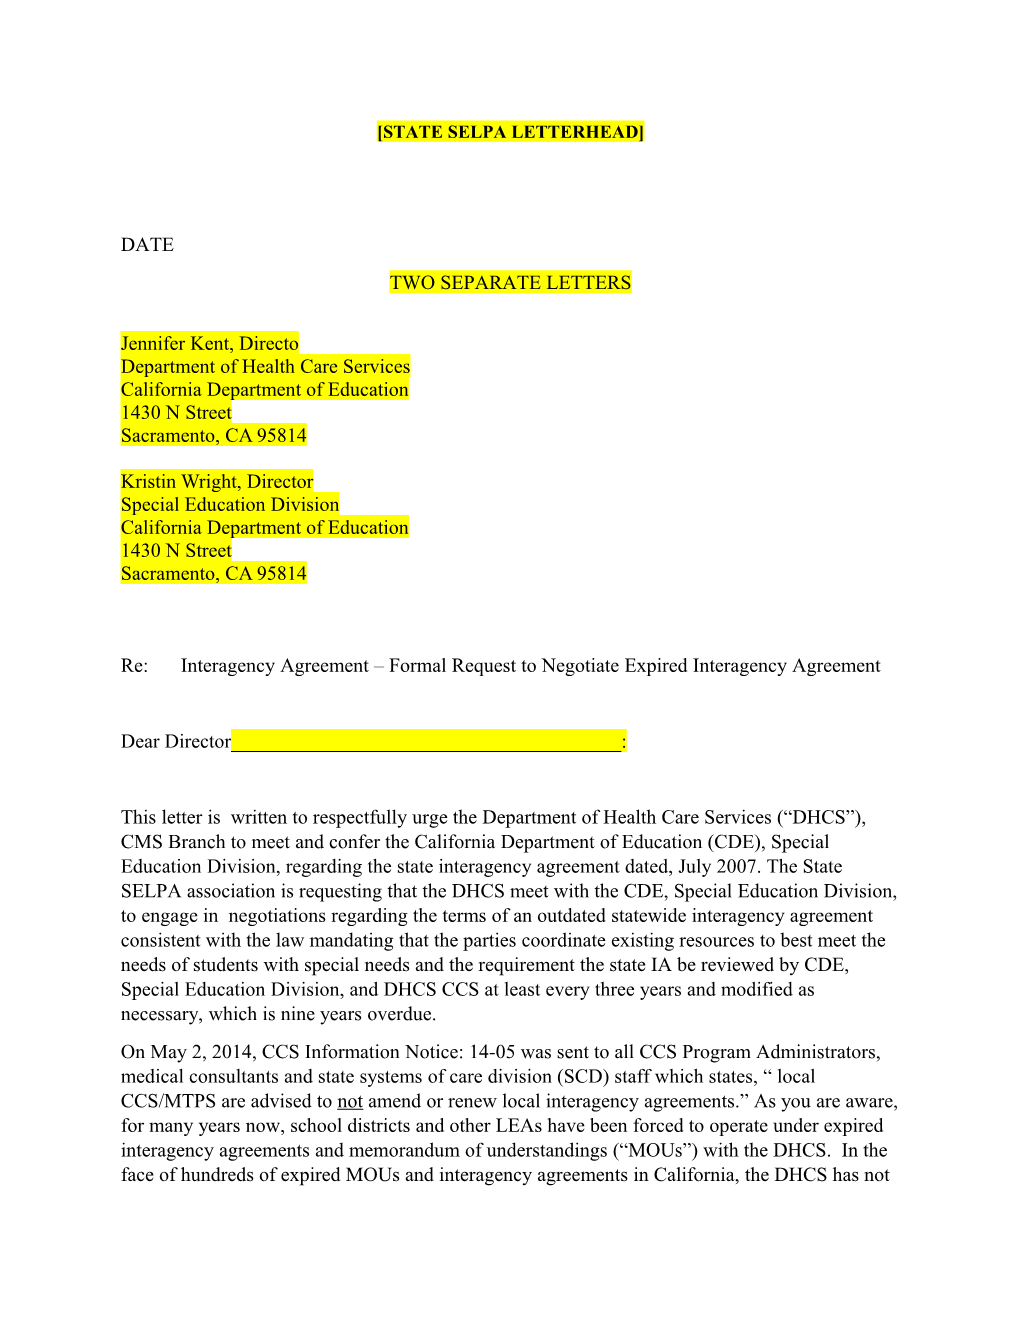 State SELPA Letter to DHCS Re Interagency Agreements (SC084495;1)